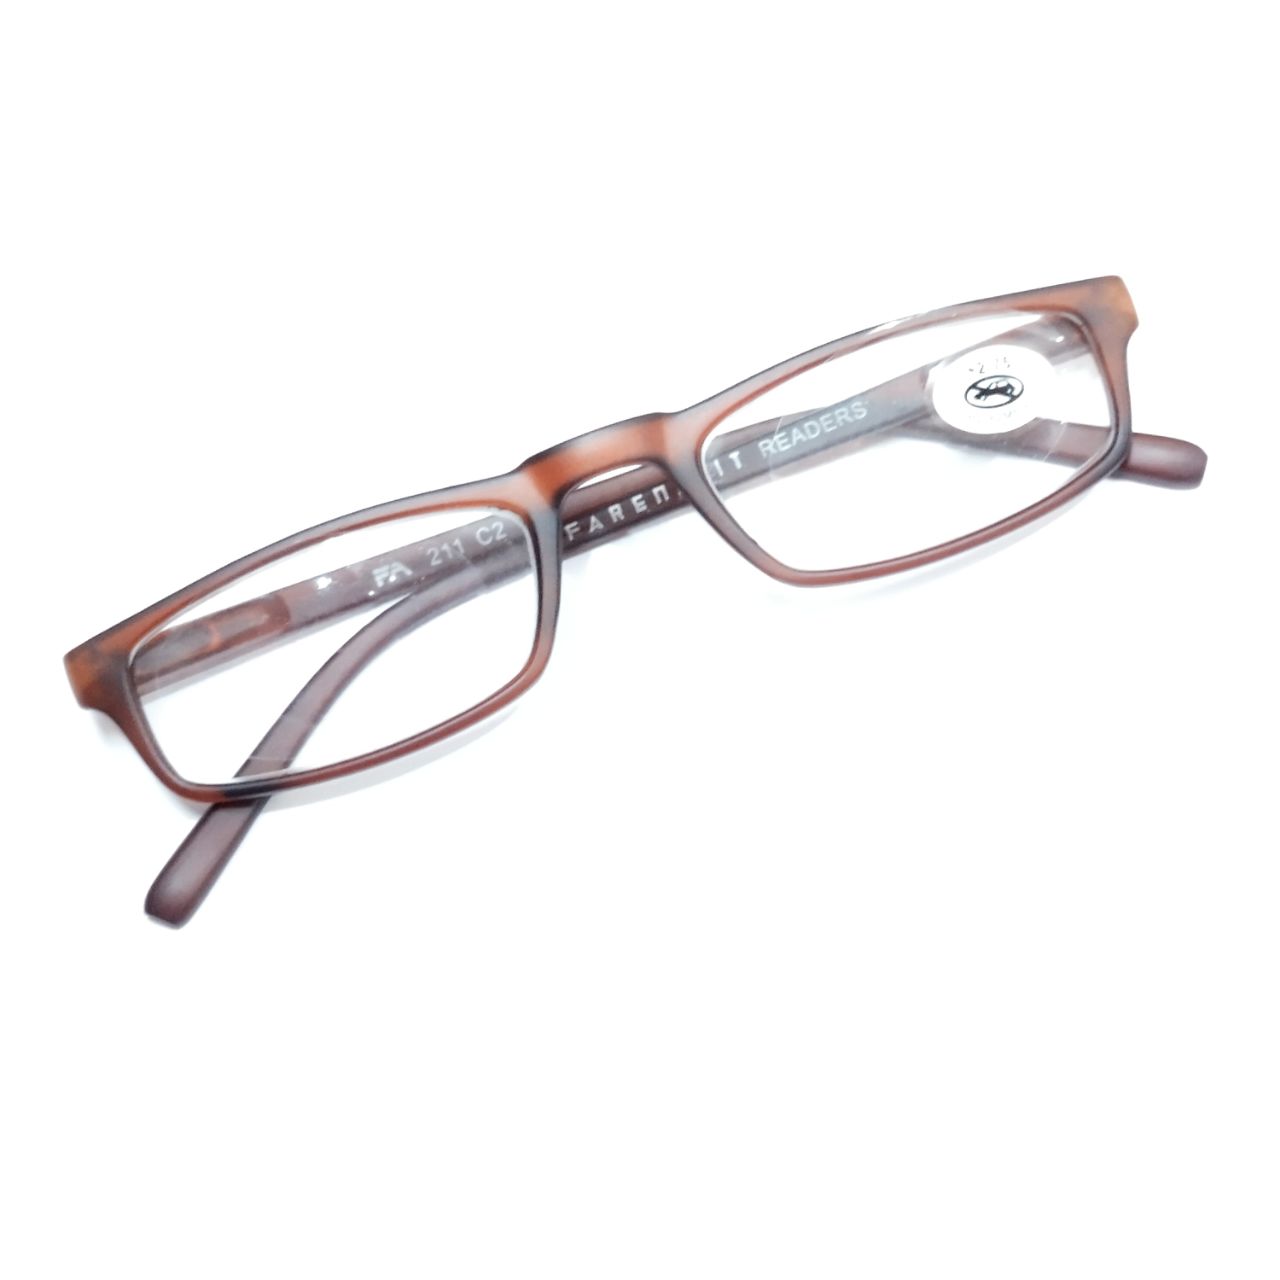 Slim Brown Computer Reading Glasses For Men and Women with Spring 211br